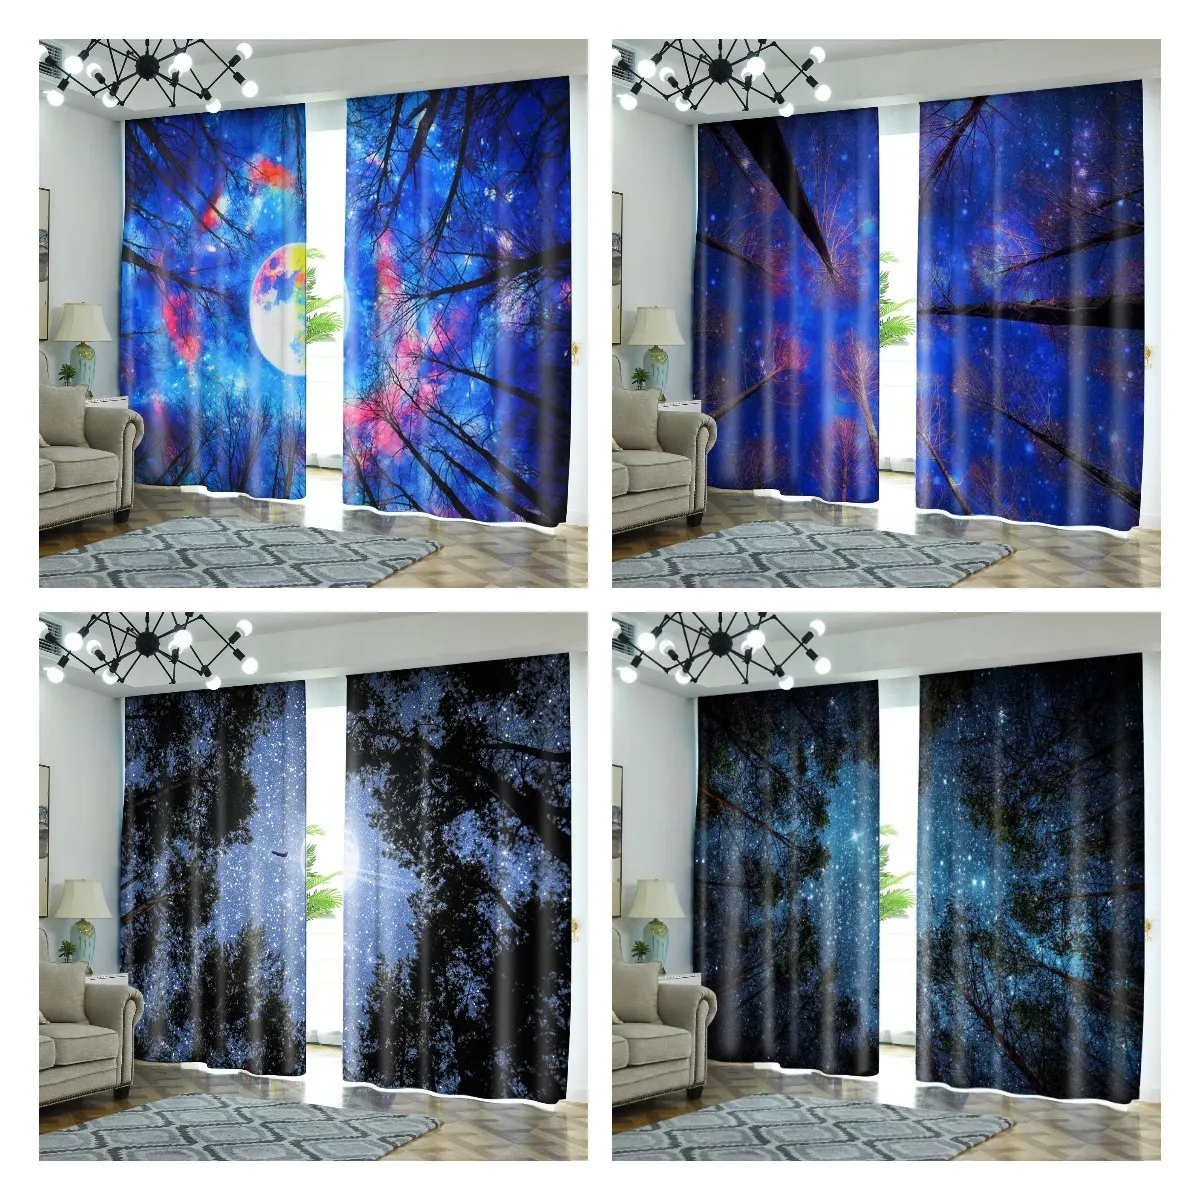 

Starry Sky Curtains for Living Room Luxury Night Forest Window Roman Blackout Curtain Nature Room Divider Cortinas 2 Panels